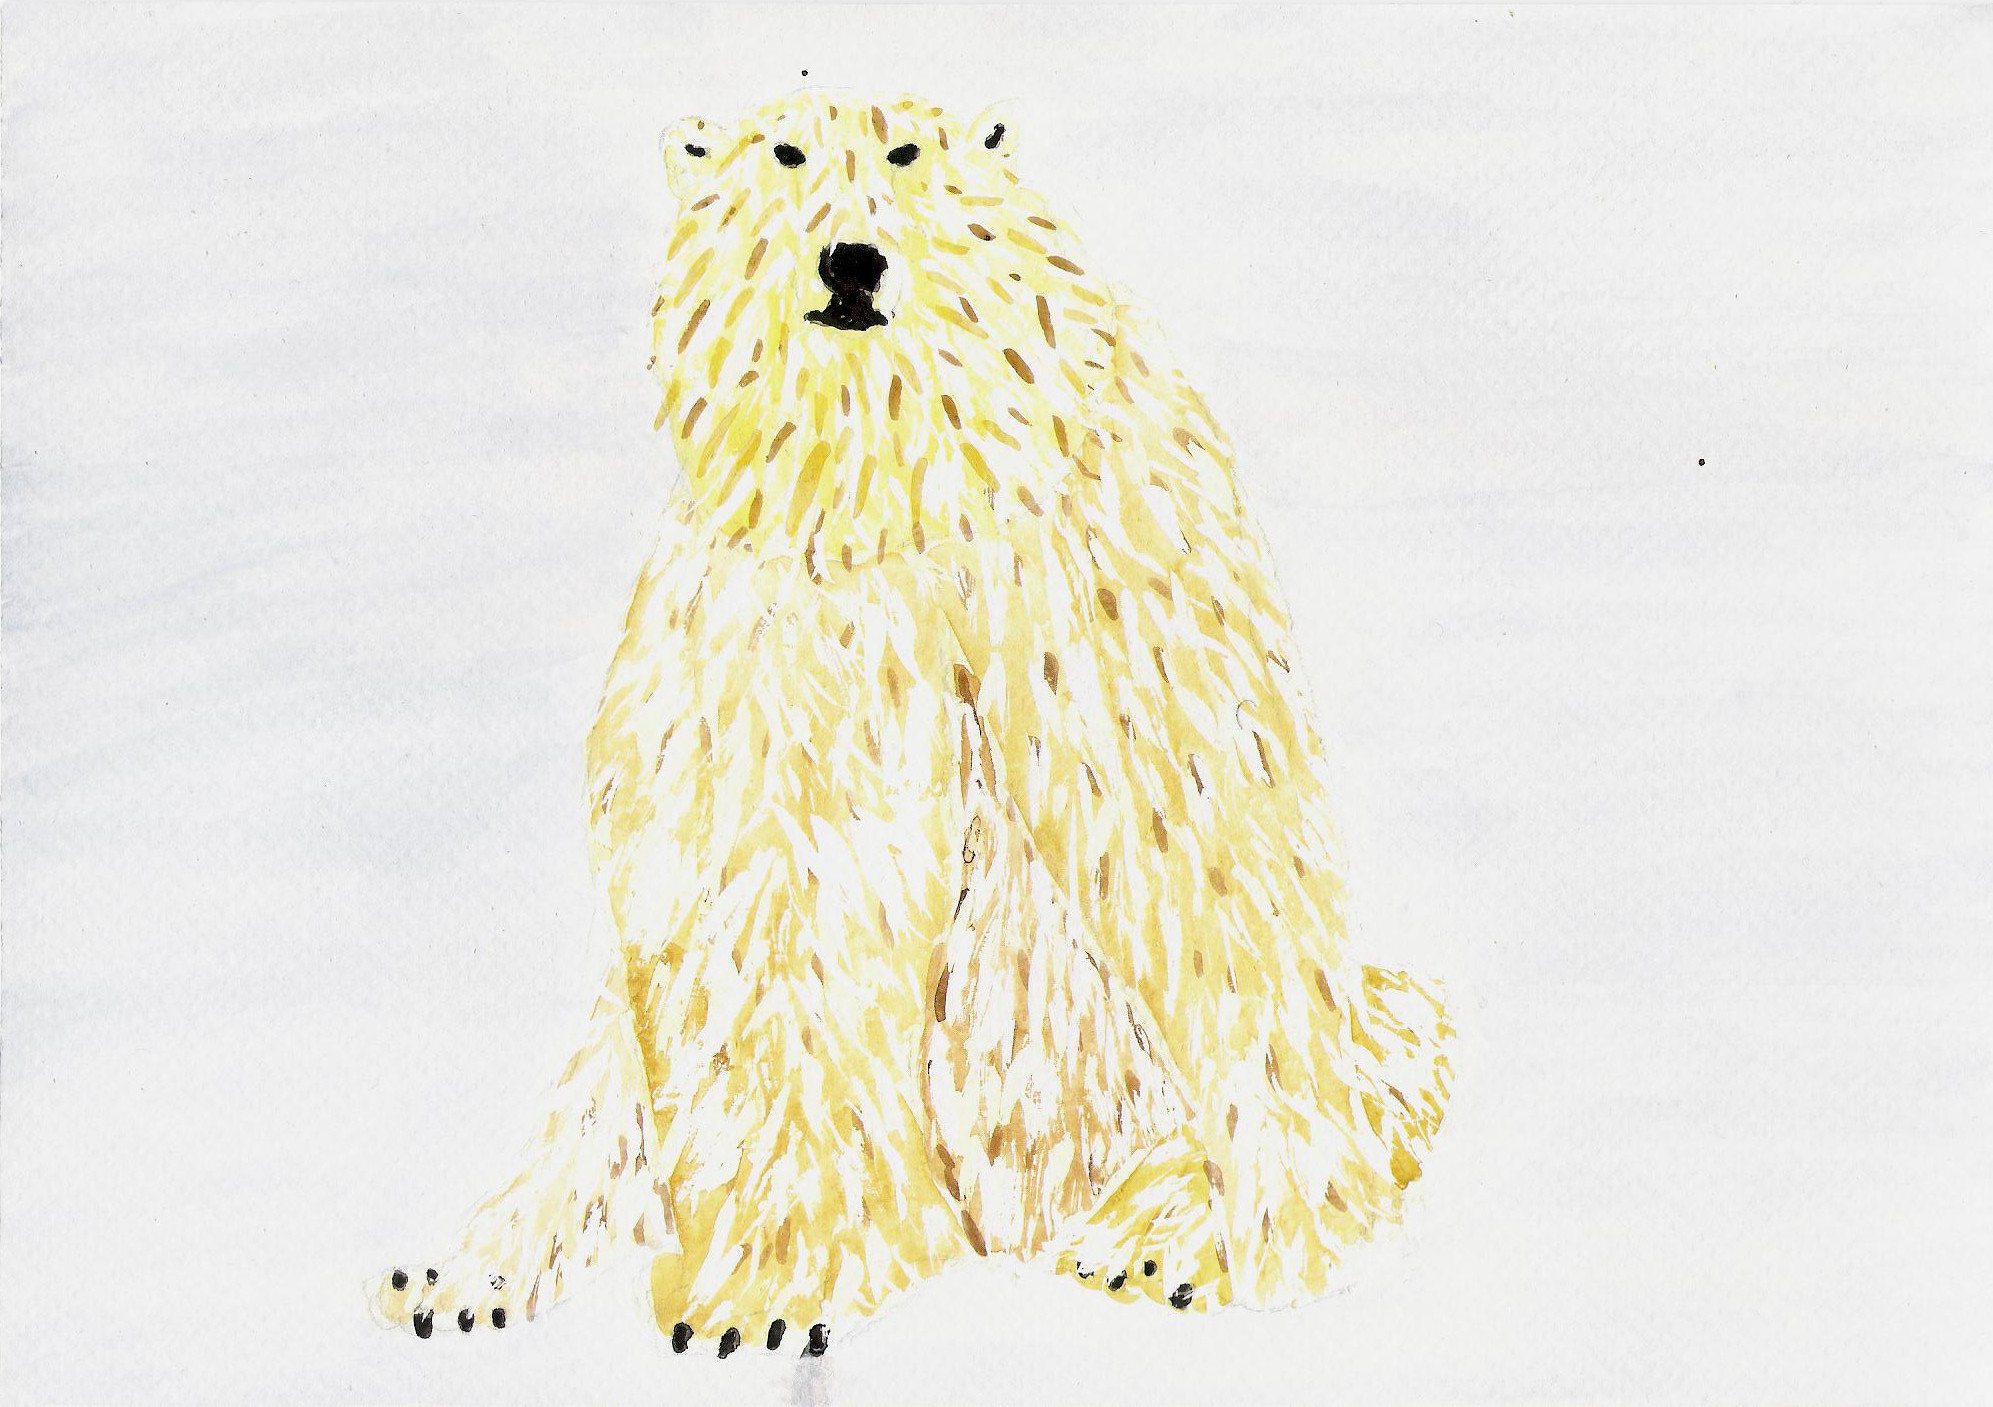 drawing of a bear standing in the snow